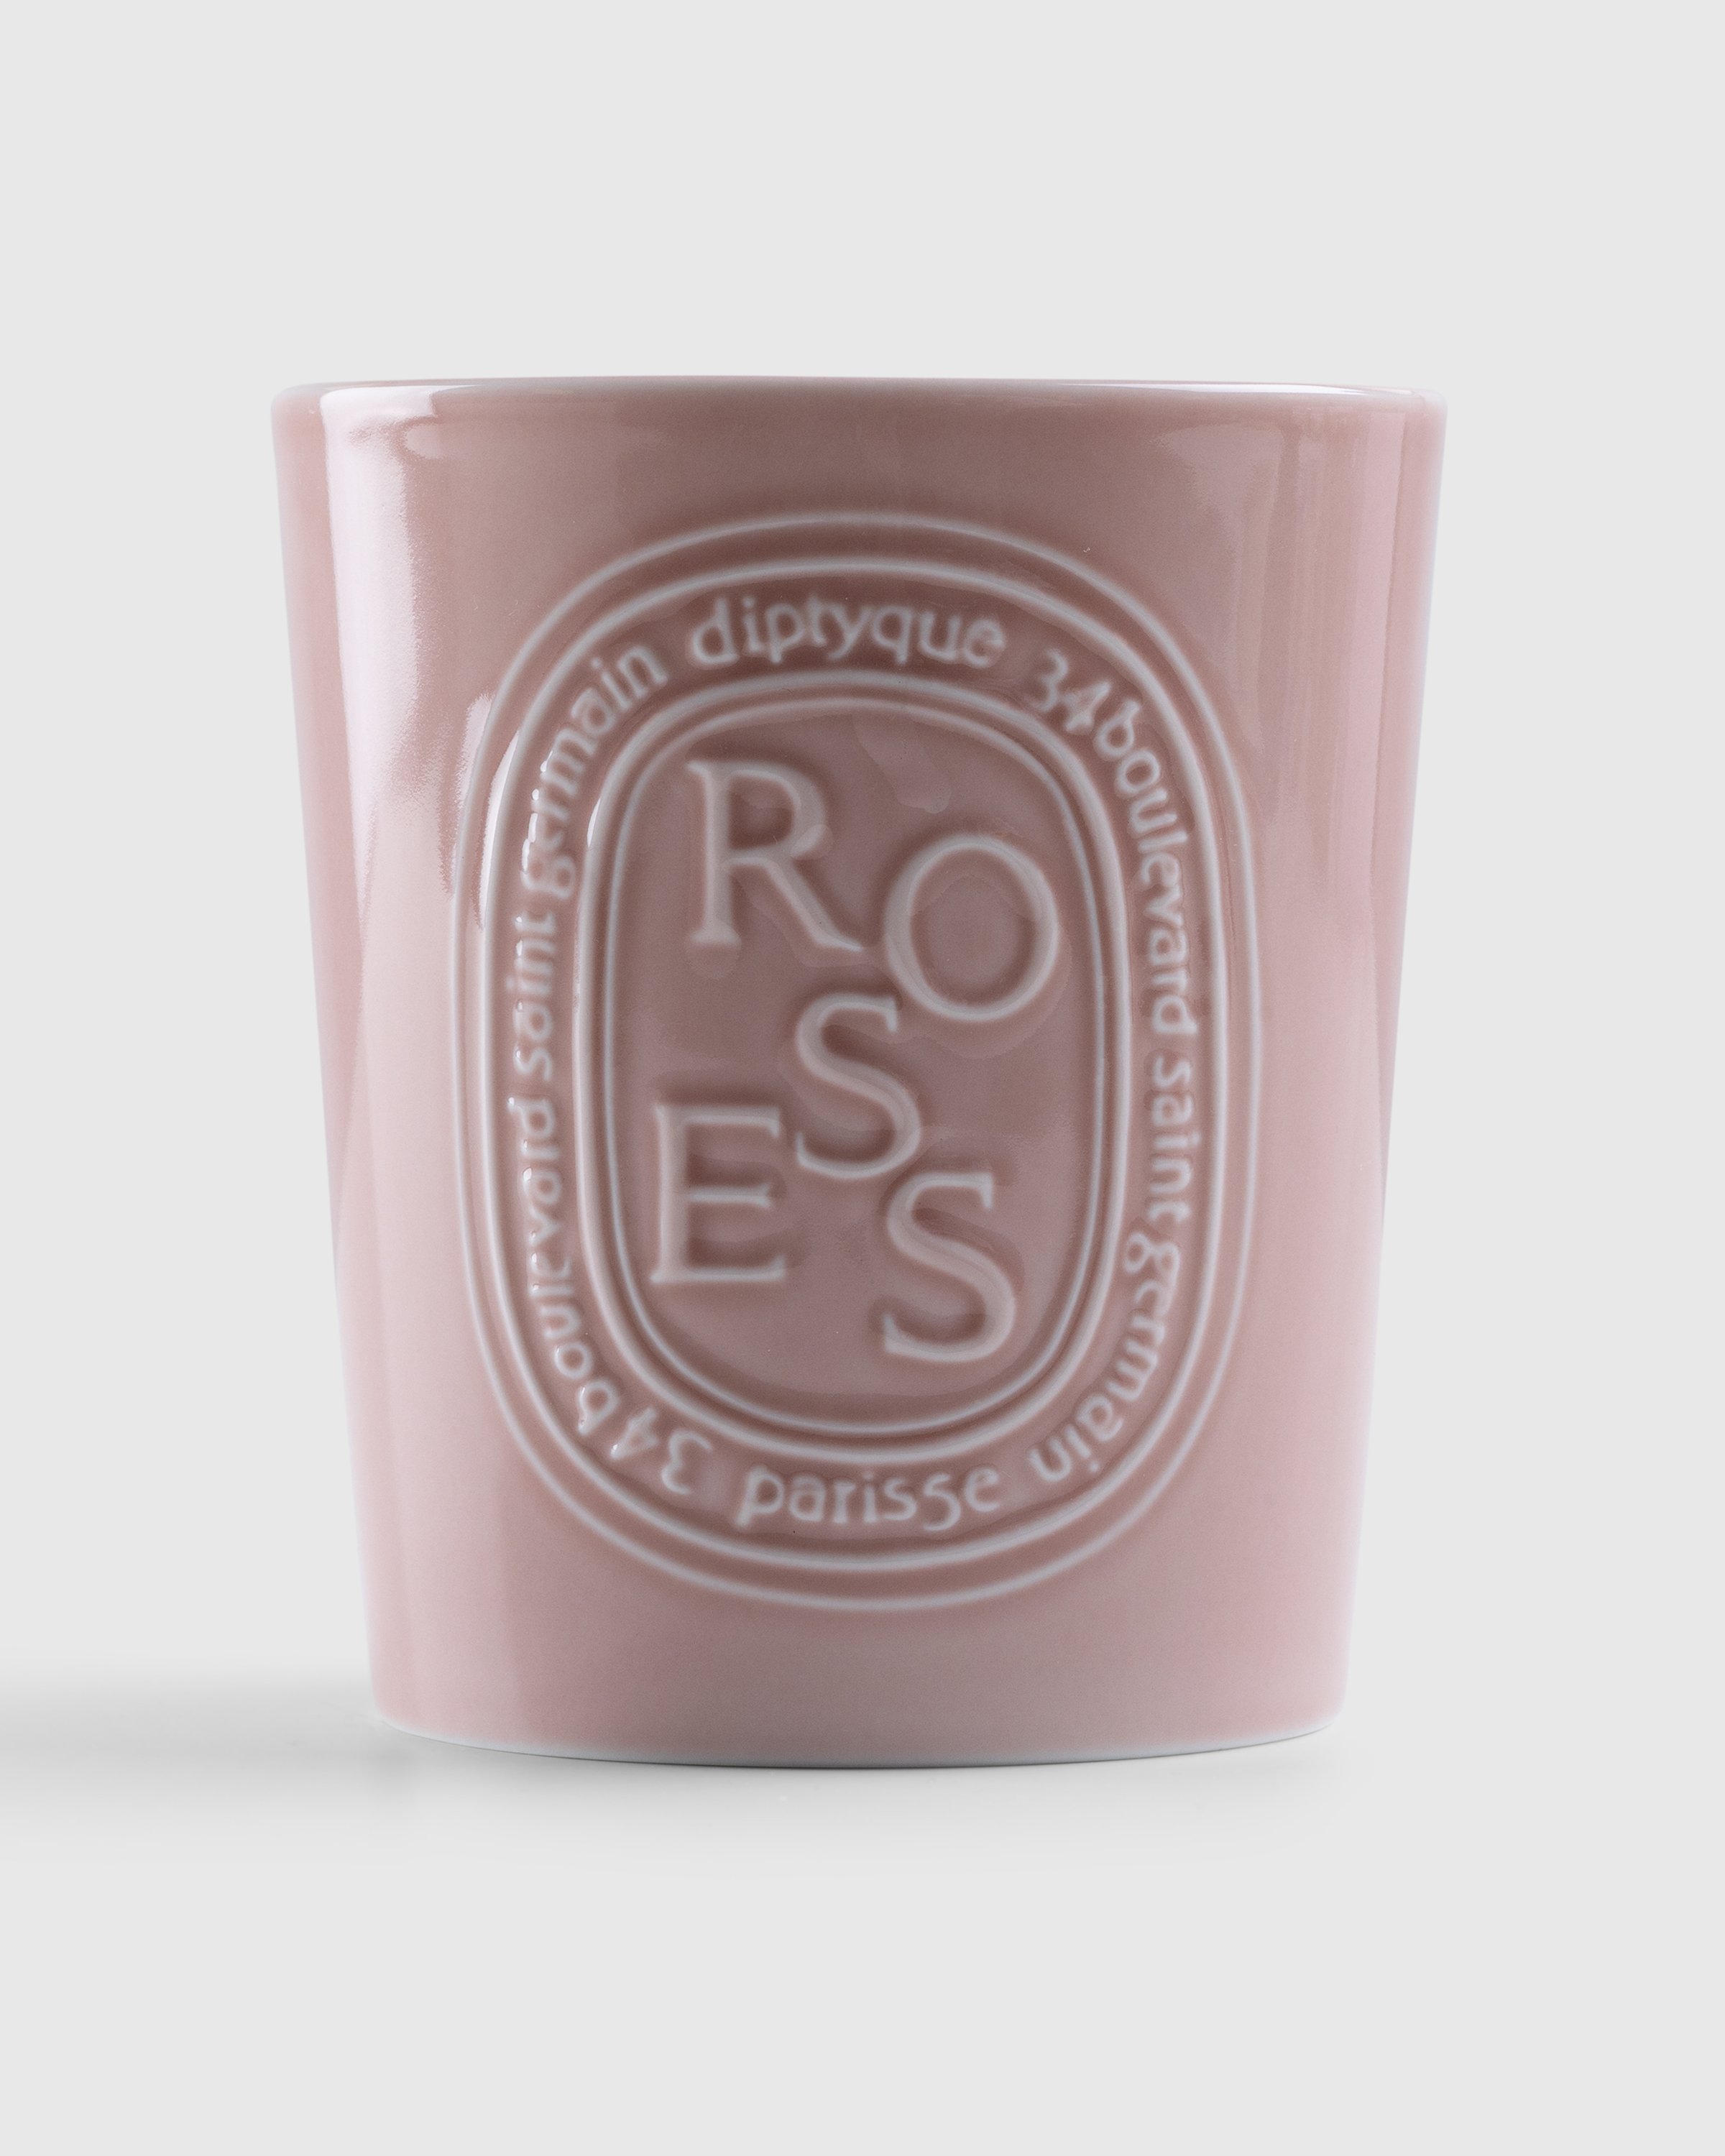 Diptyque - Candle Roses 600g - Lifestyle - Pink - Image 1